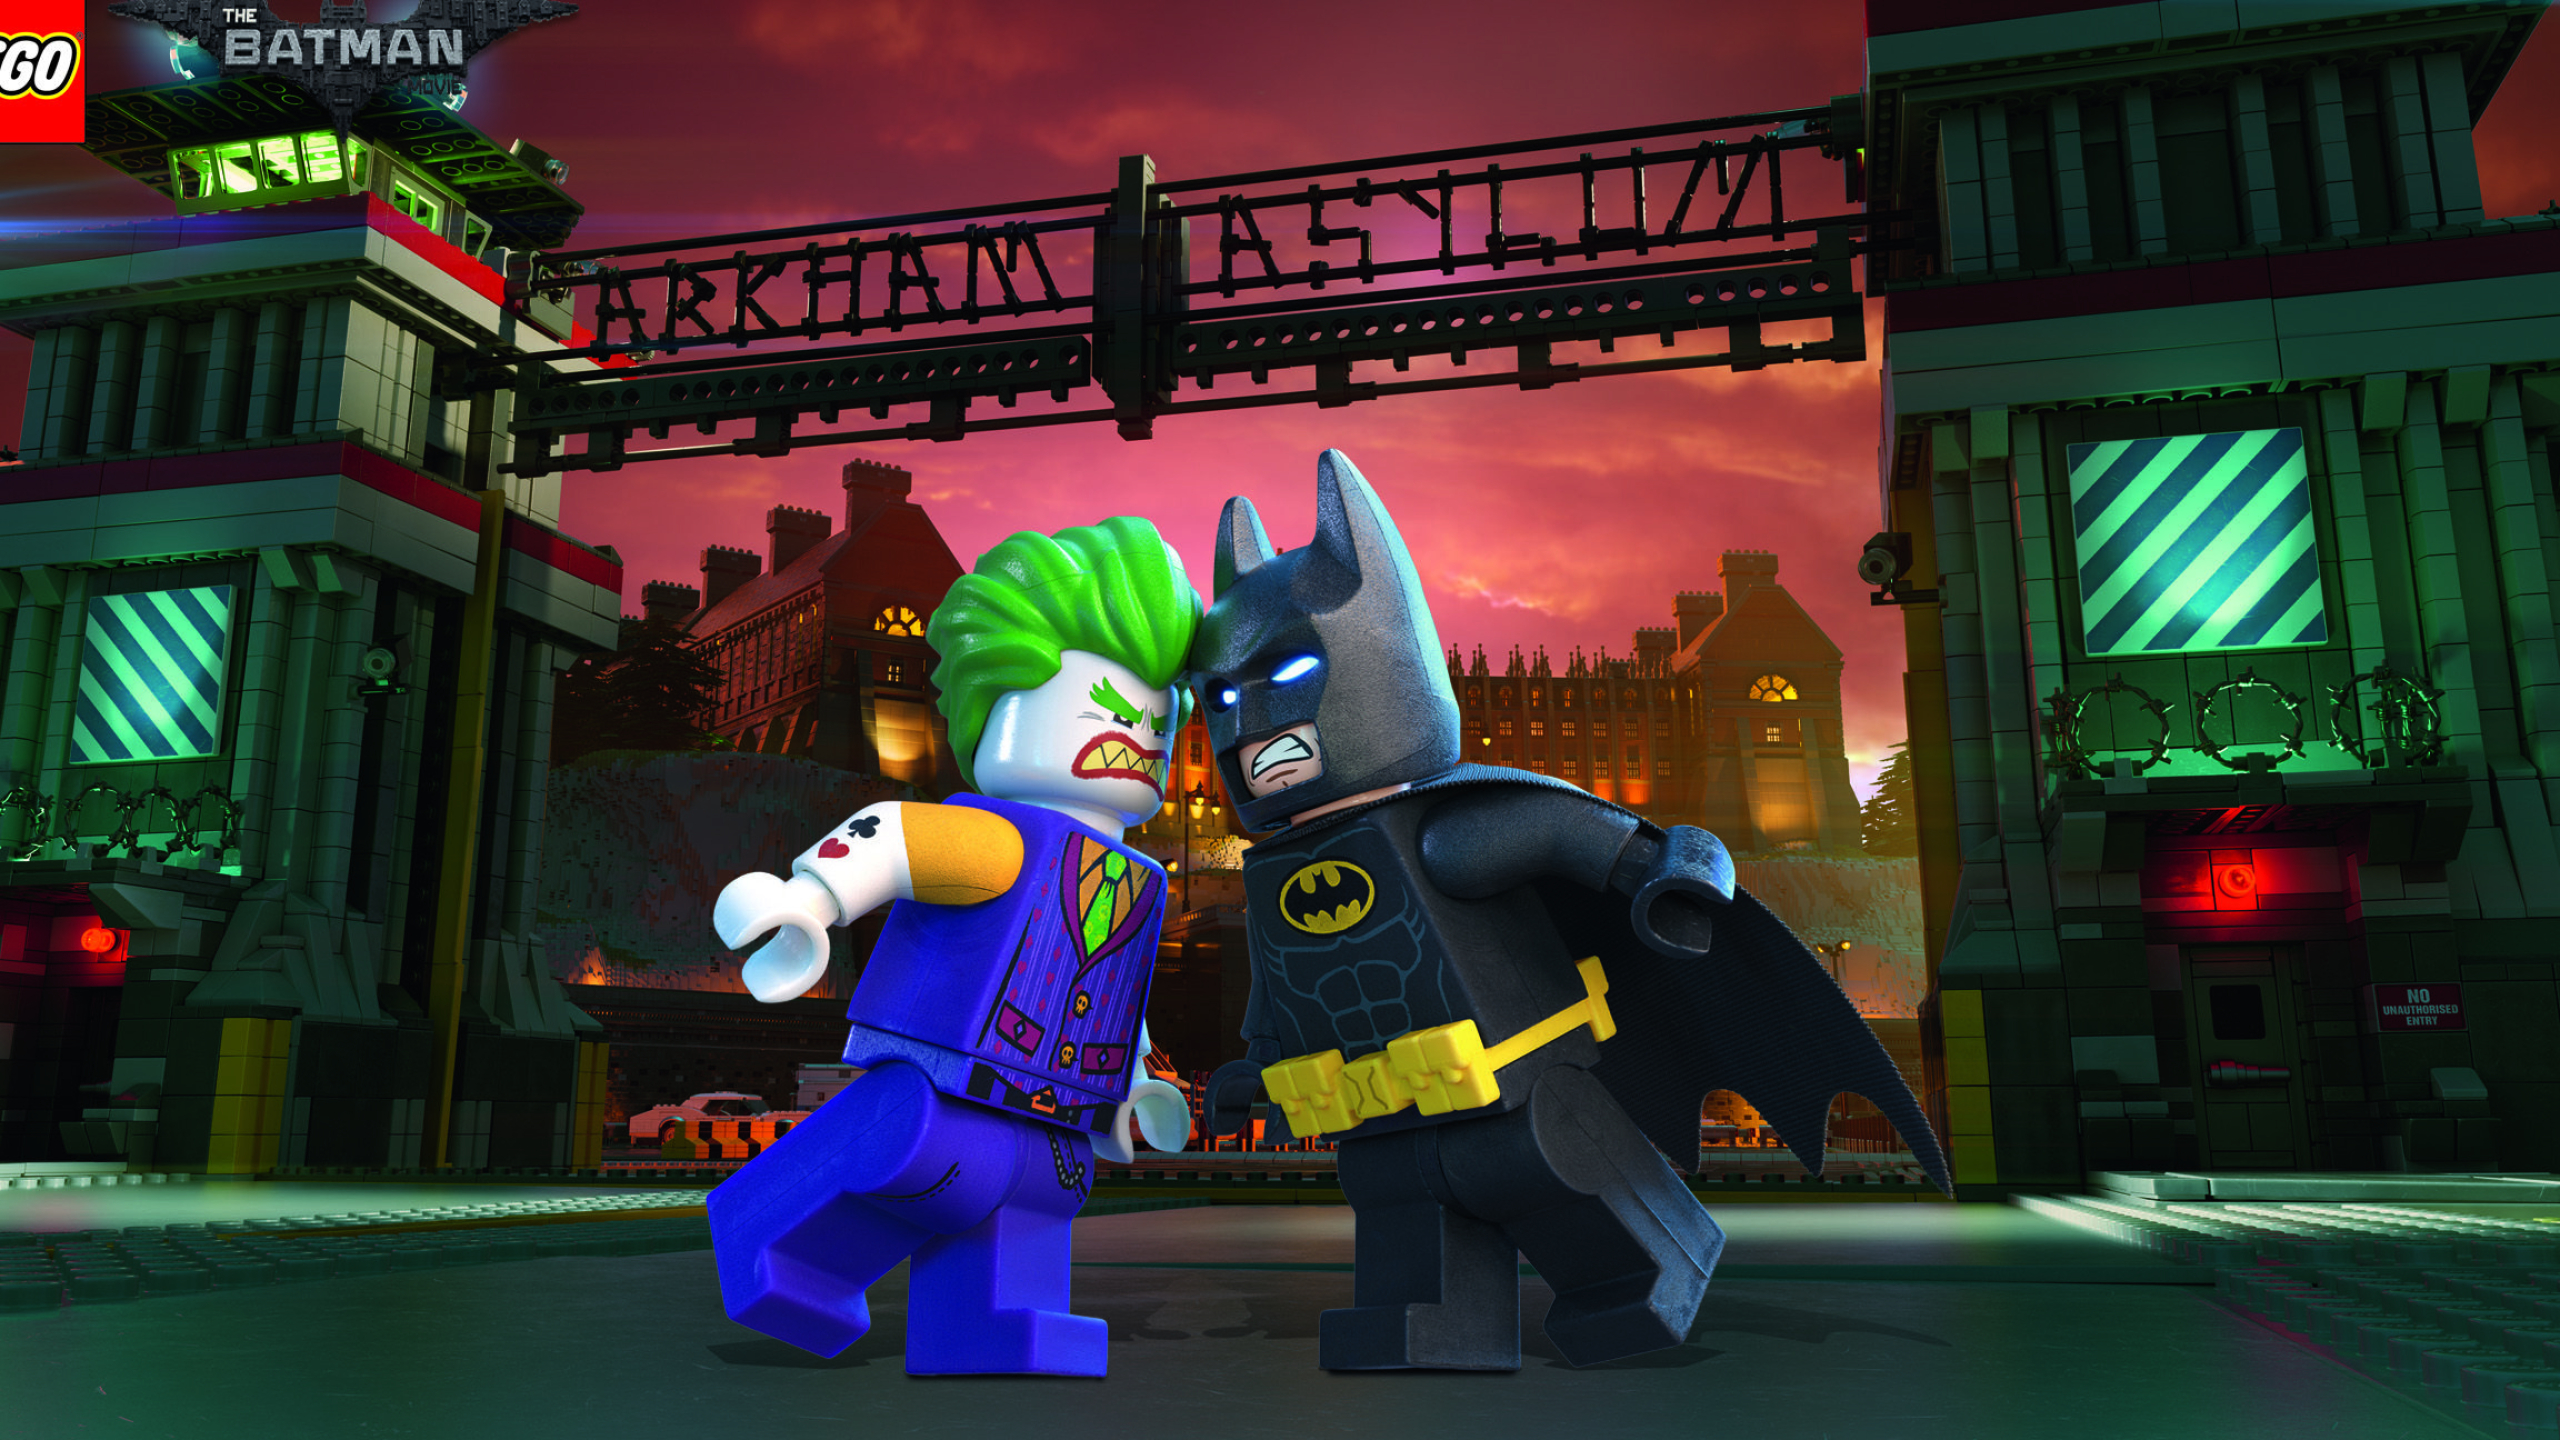 Lego Batman Movie pin page, Exciting visuals, Memorable moments, Share-worthy content, 2560x1440 HD Desktop